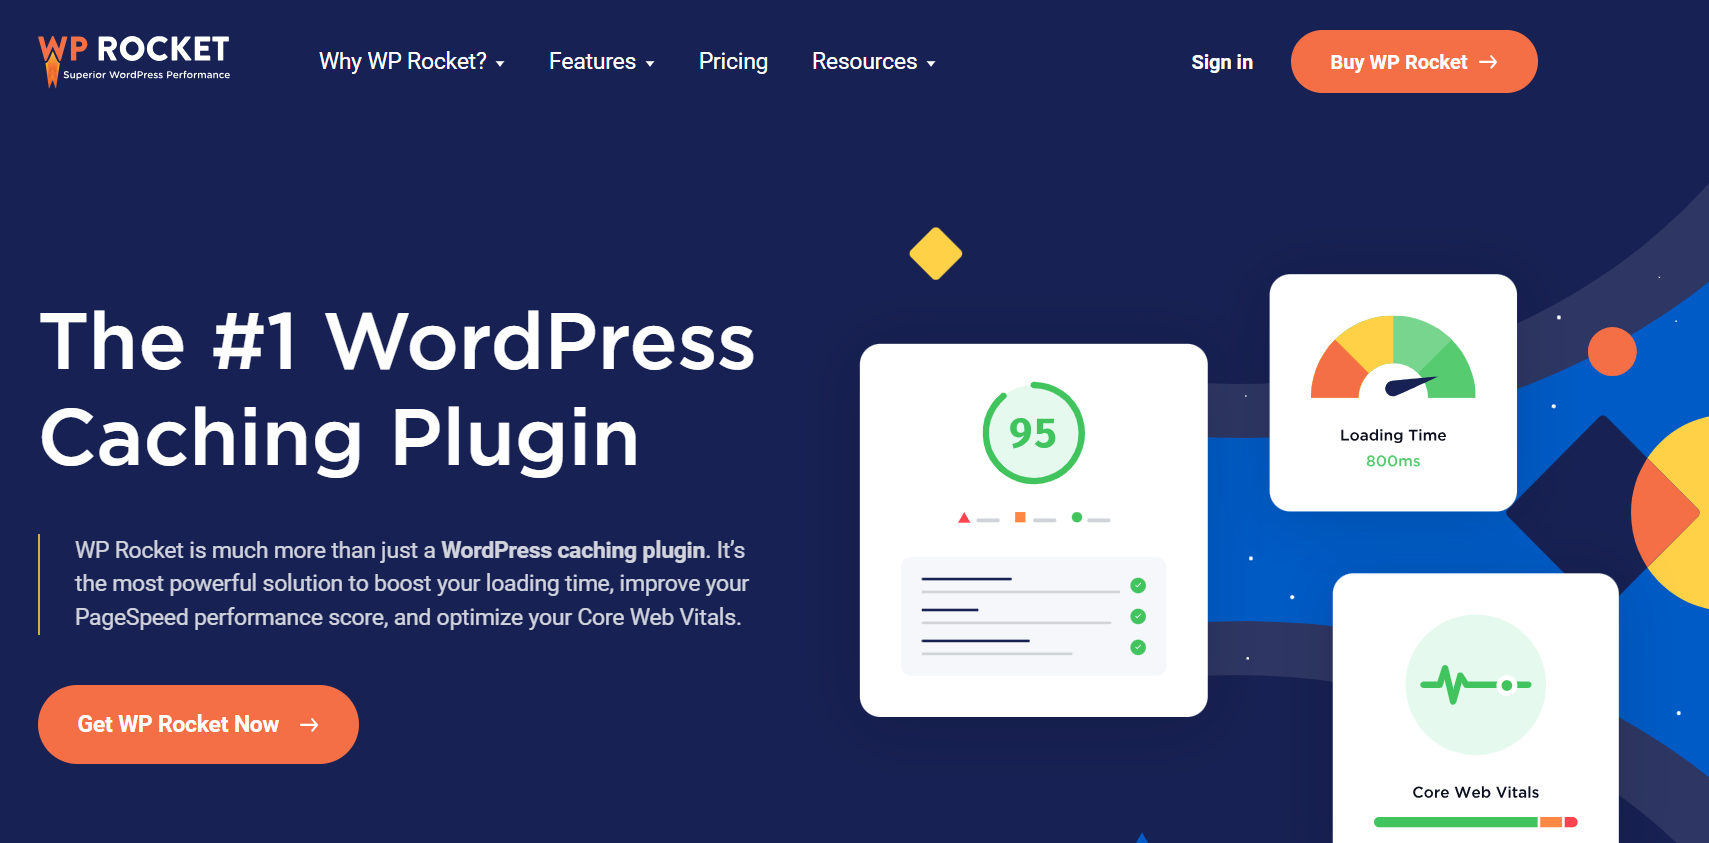 ownload WordPress Load Fast in a Few Clicks .Recognized as the most powerful caching